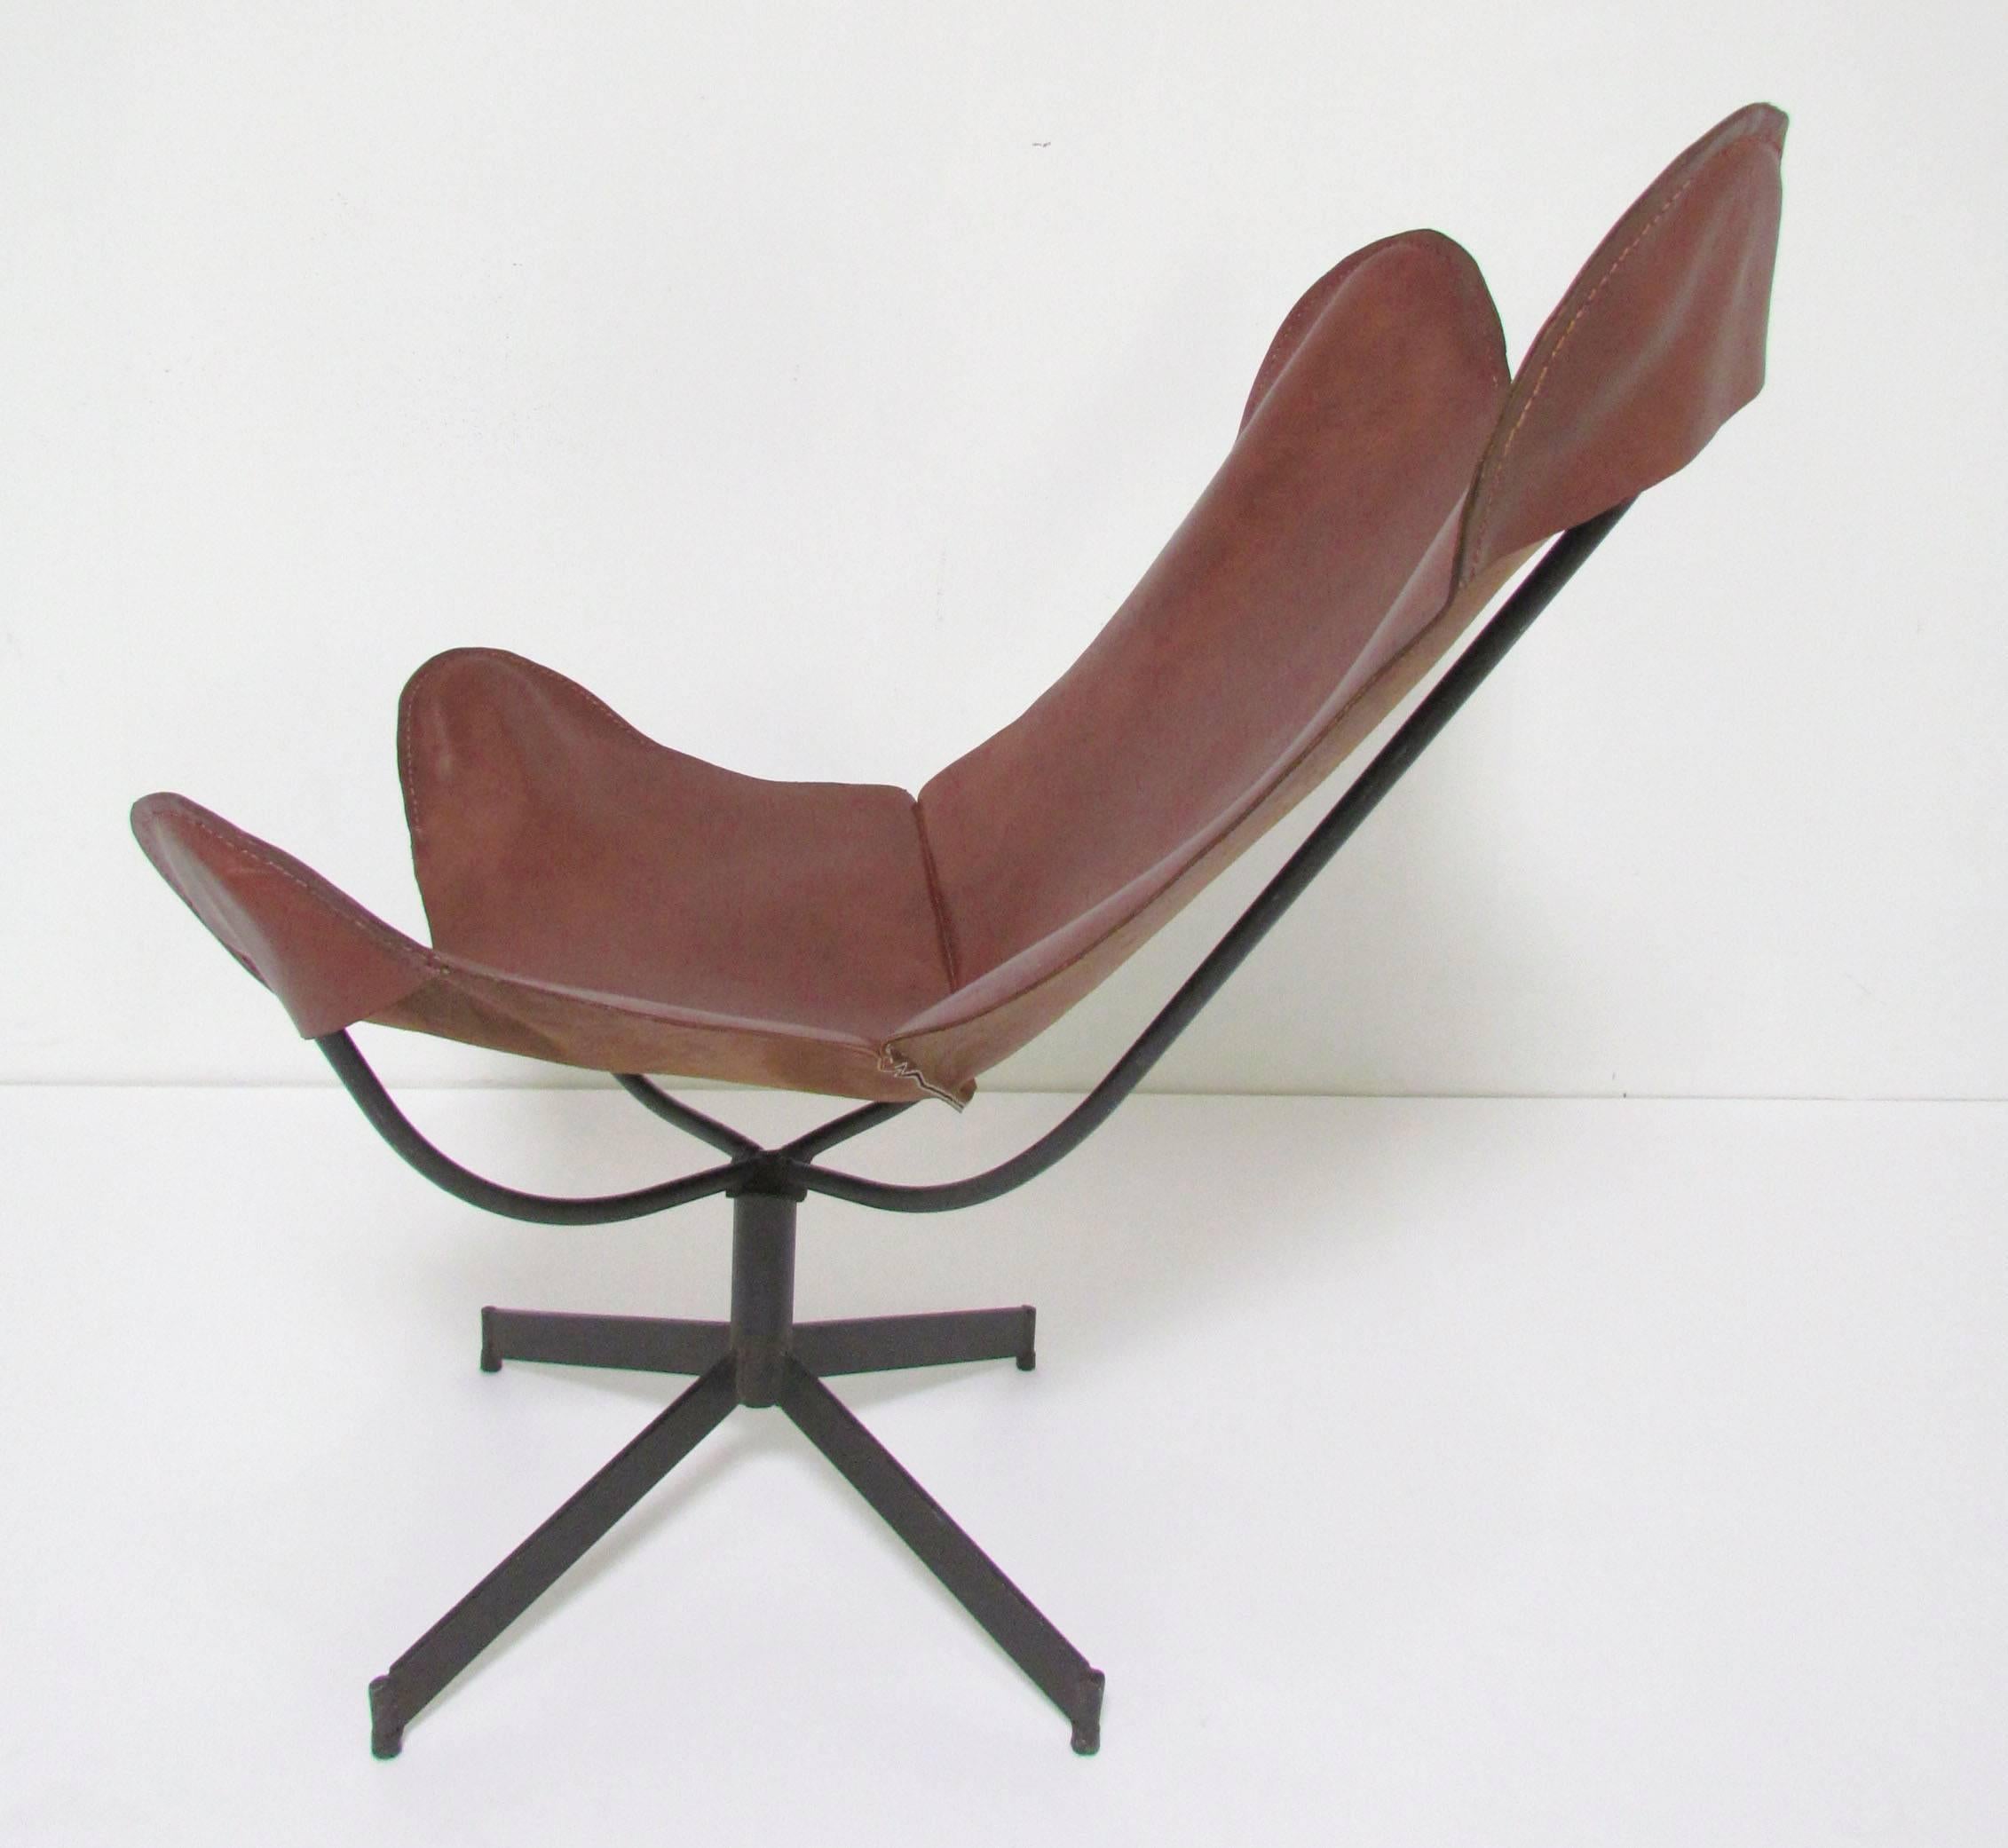 Mid-Century Modern Swivel Leather Sling Lounge Chair by Leathercrafter, New York, circa 1960s